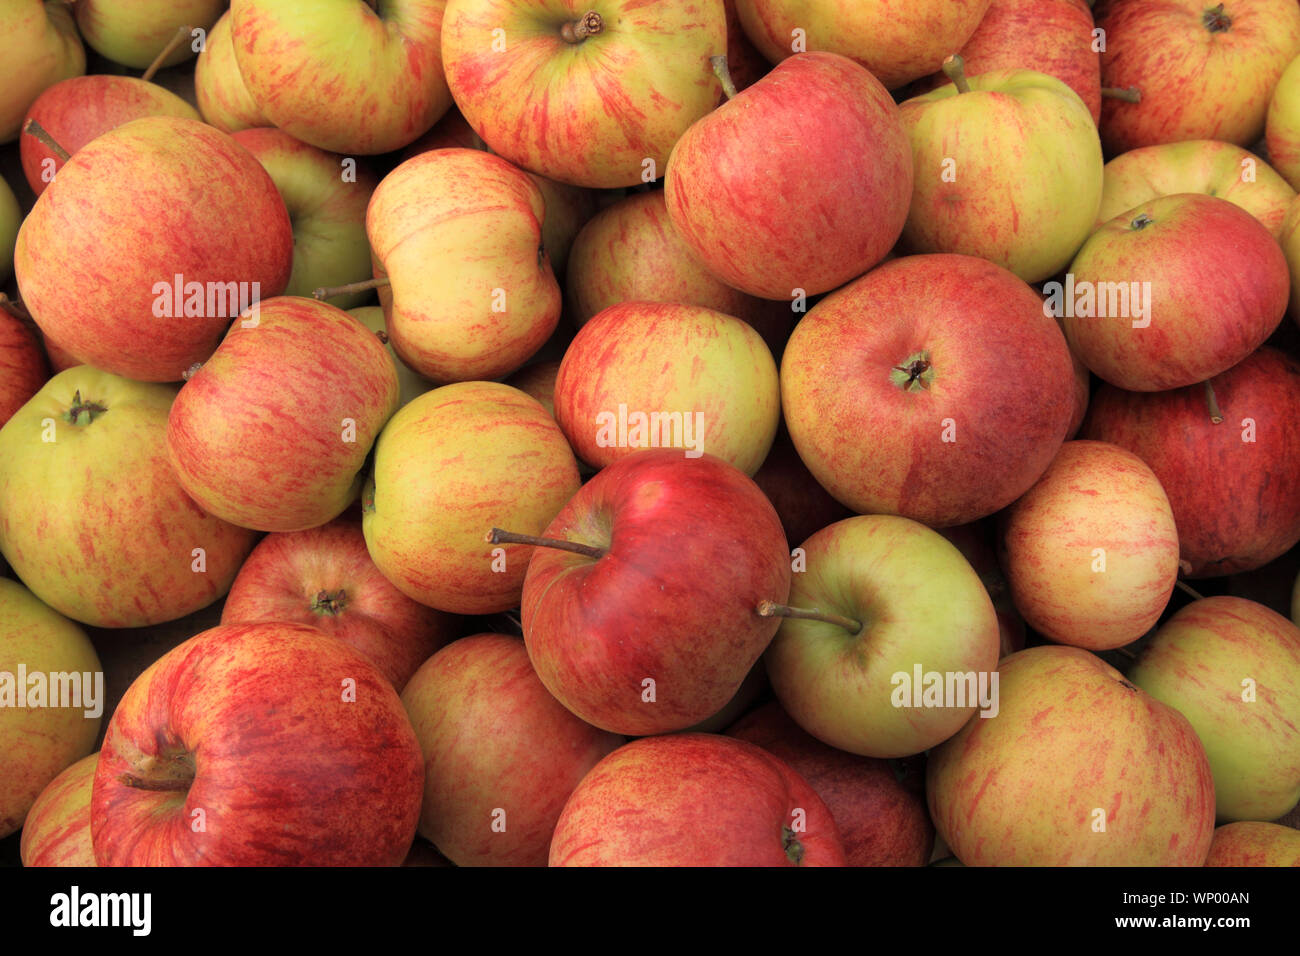 Apple 'Epicure', apples, named variety, healthy eating, farm shop, display Stock Photo